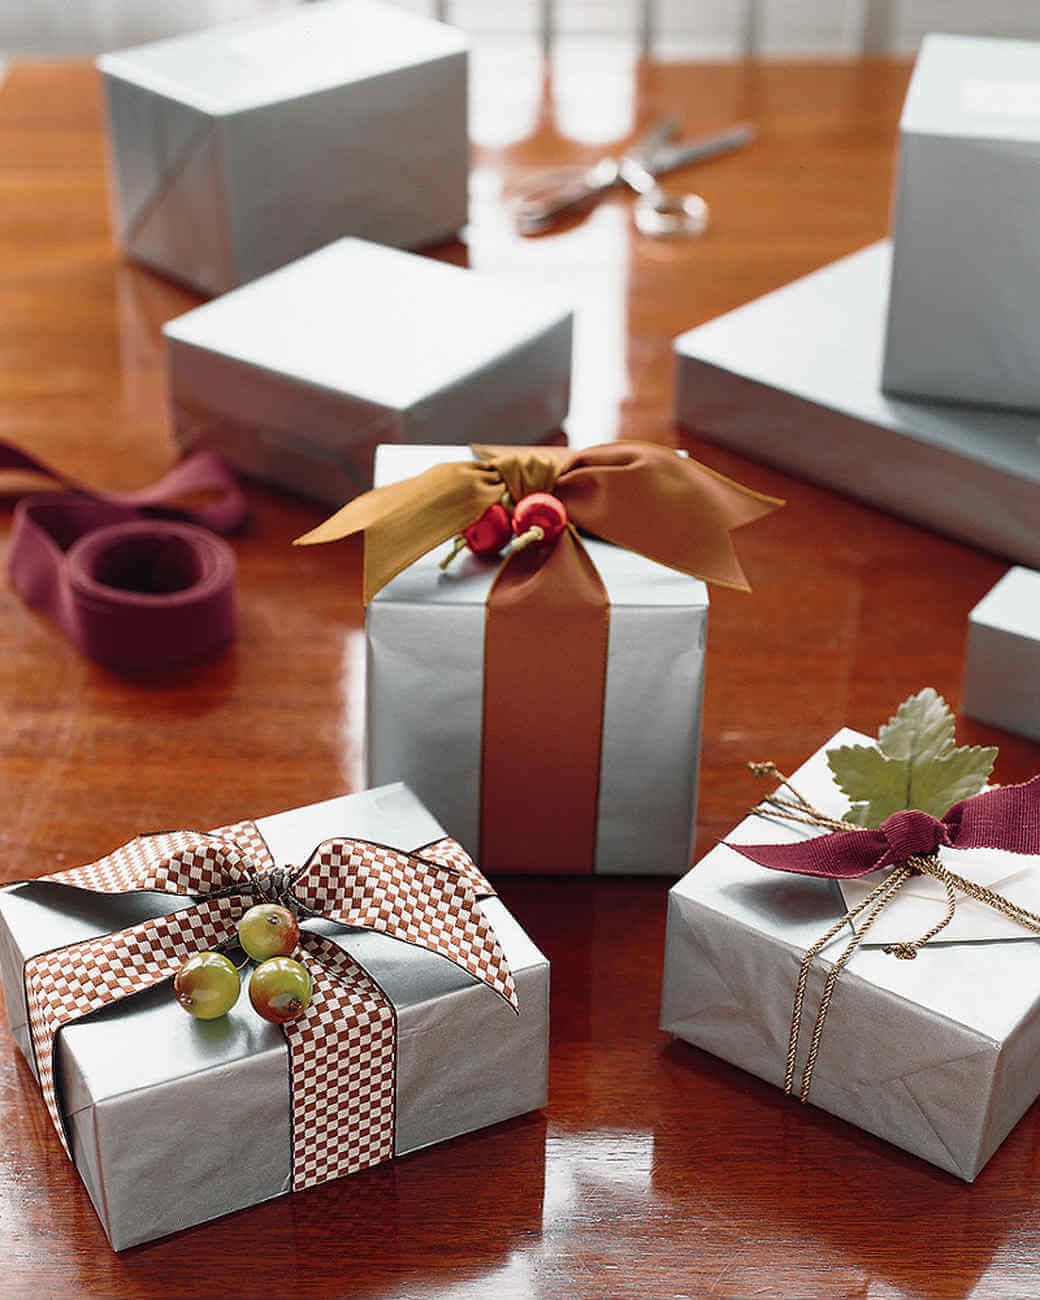 Four wrapped presents sitting on top of a wooden table
